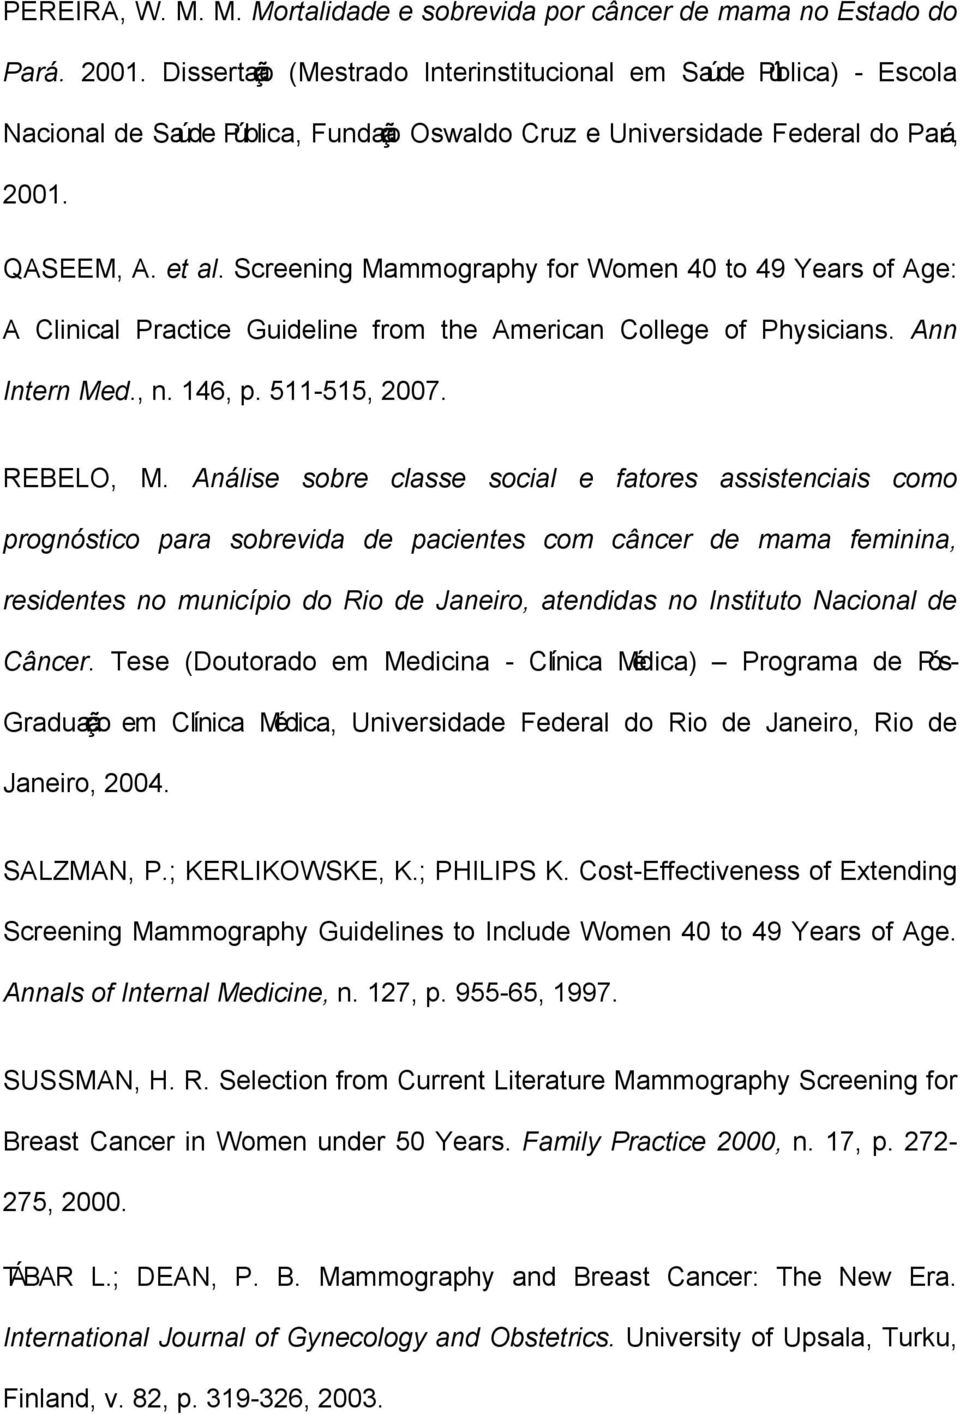 Screening Mammography for Women 40 to 49 Years of Age: A Clinical Practice Guideline from the American College of Physicians. Ann Intern Med., n. 146, p. 511-515, 2007. REBELO, M.